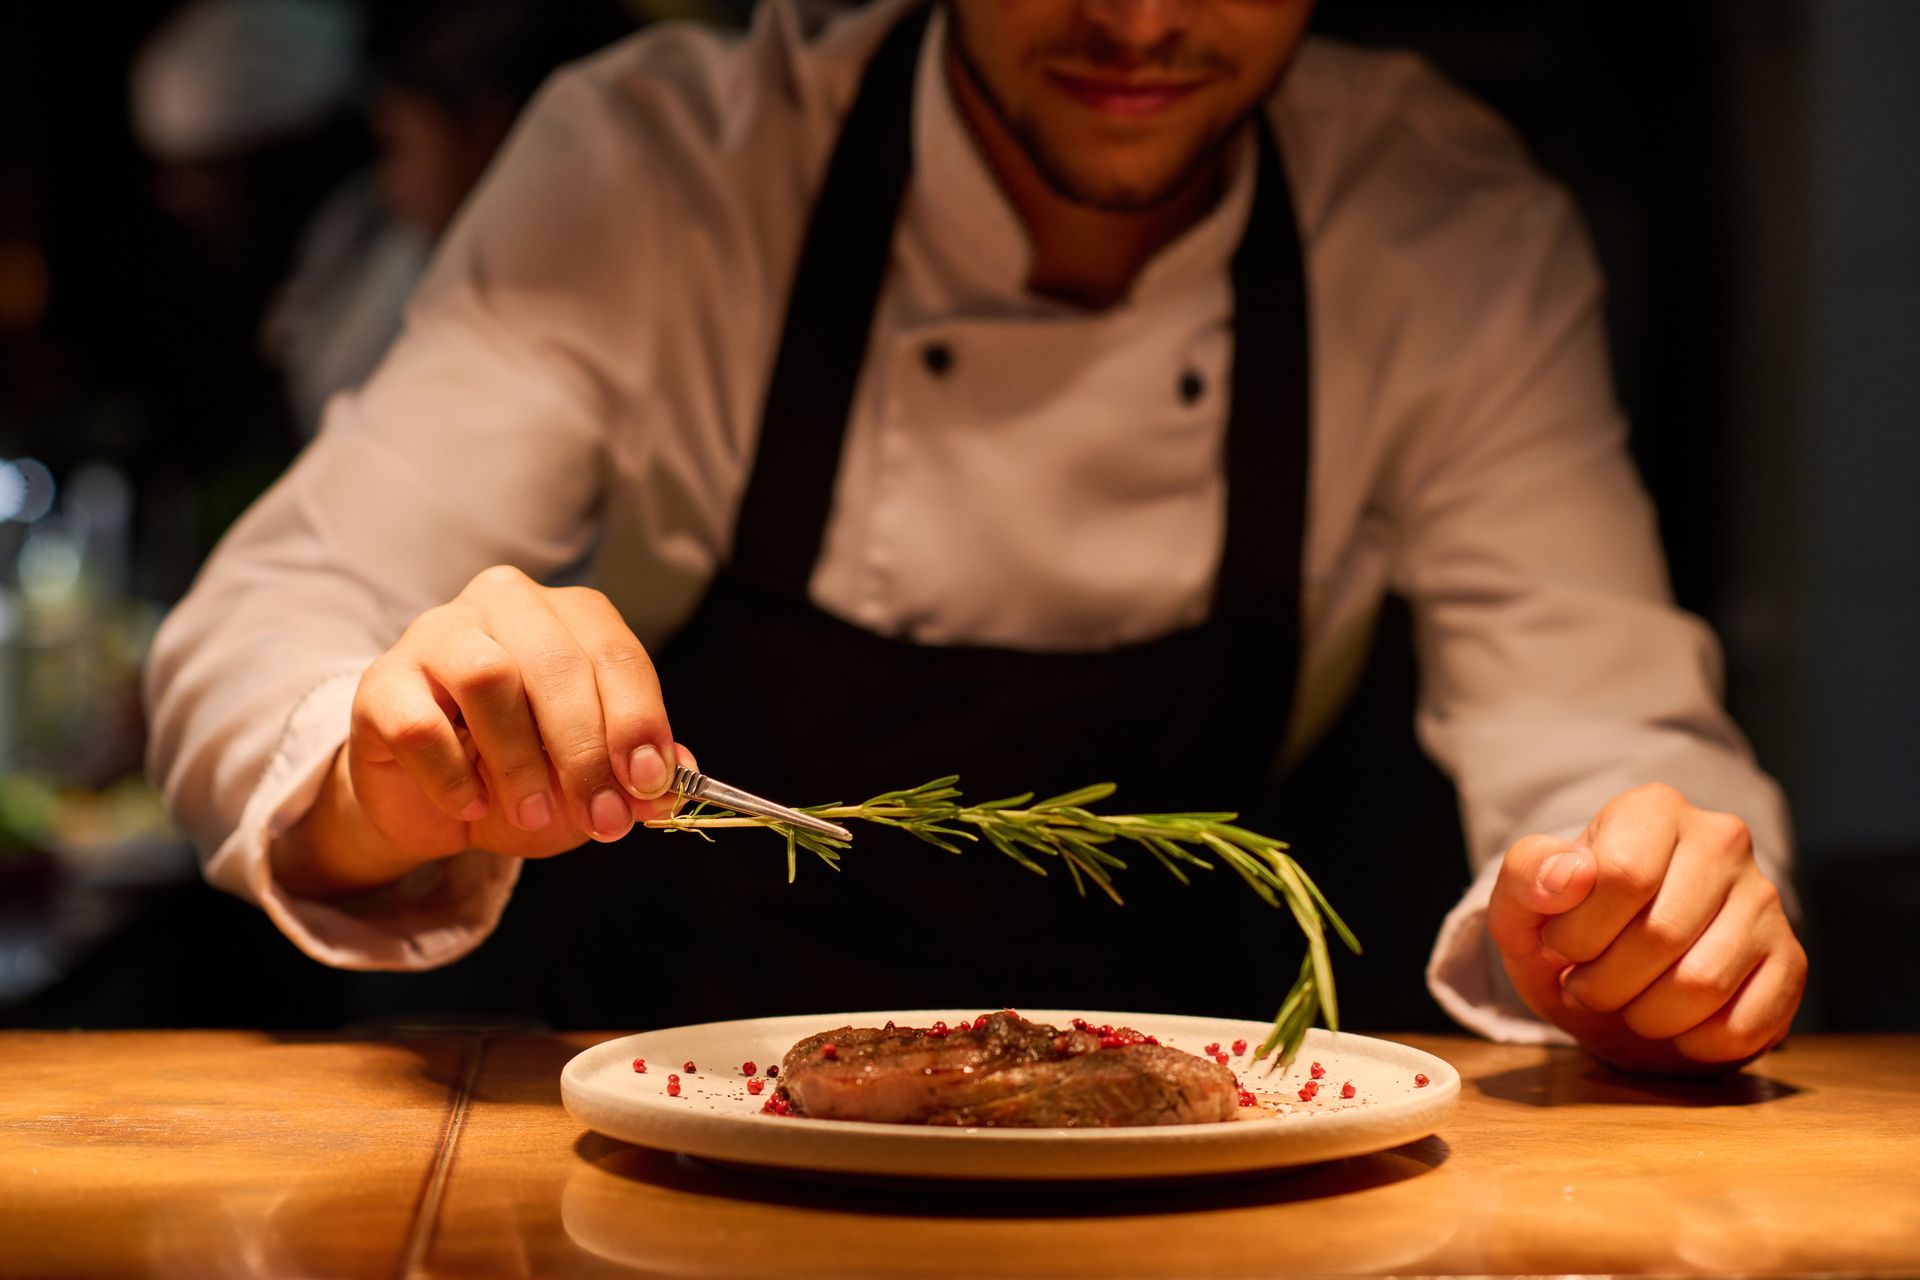 A chef is cutting a piece of meat on a plate.